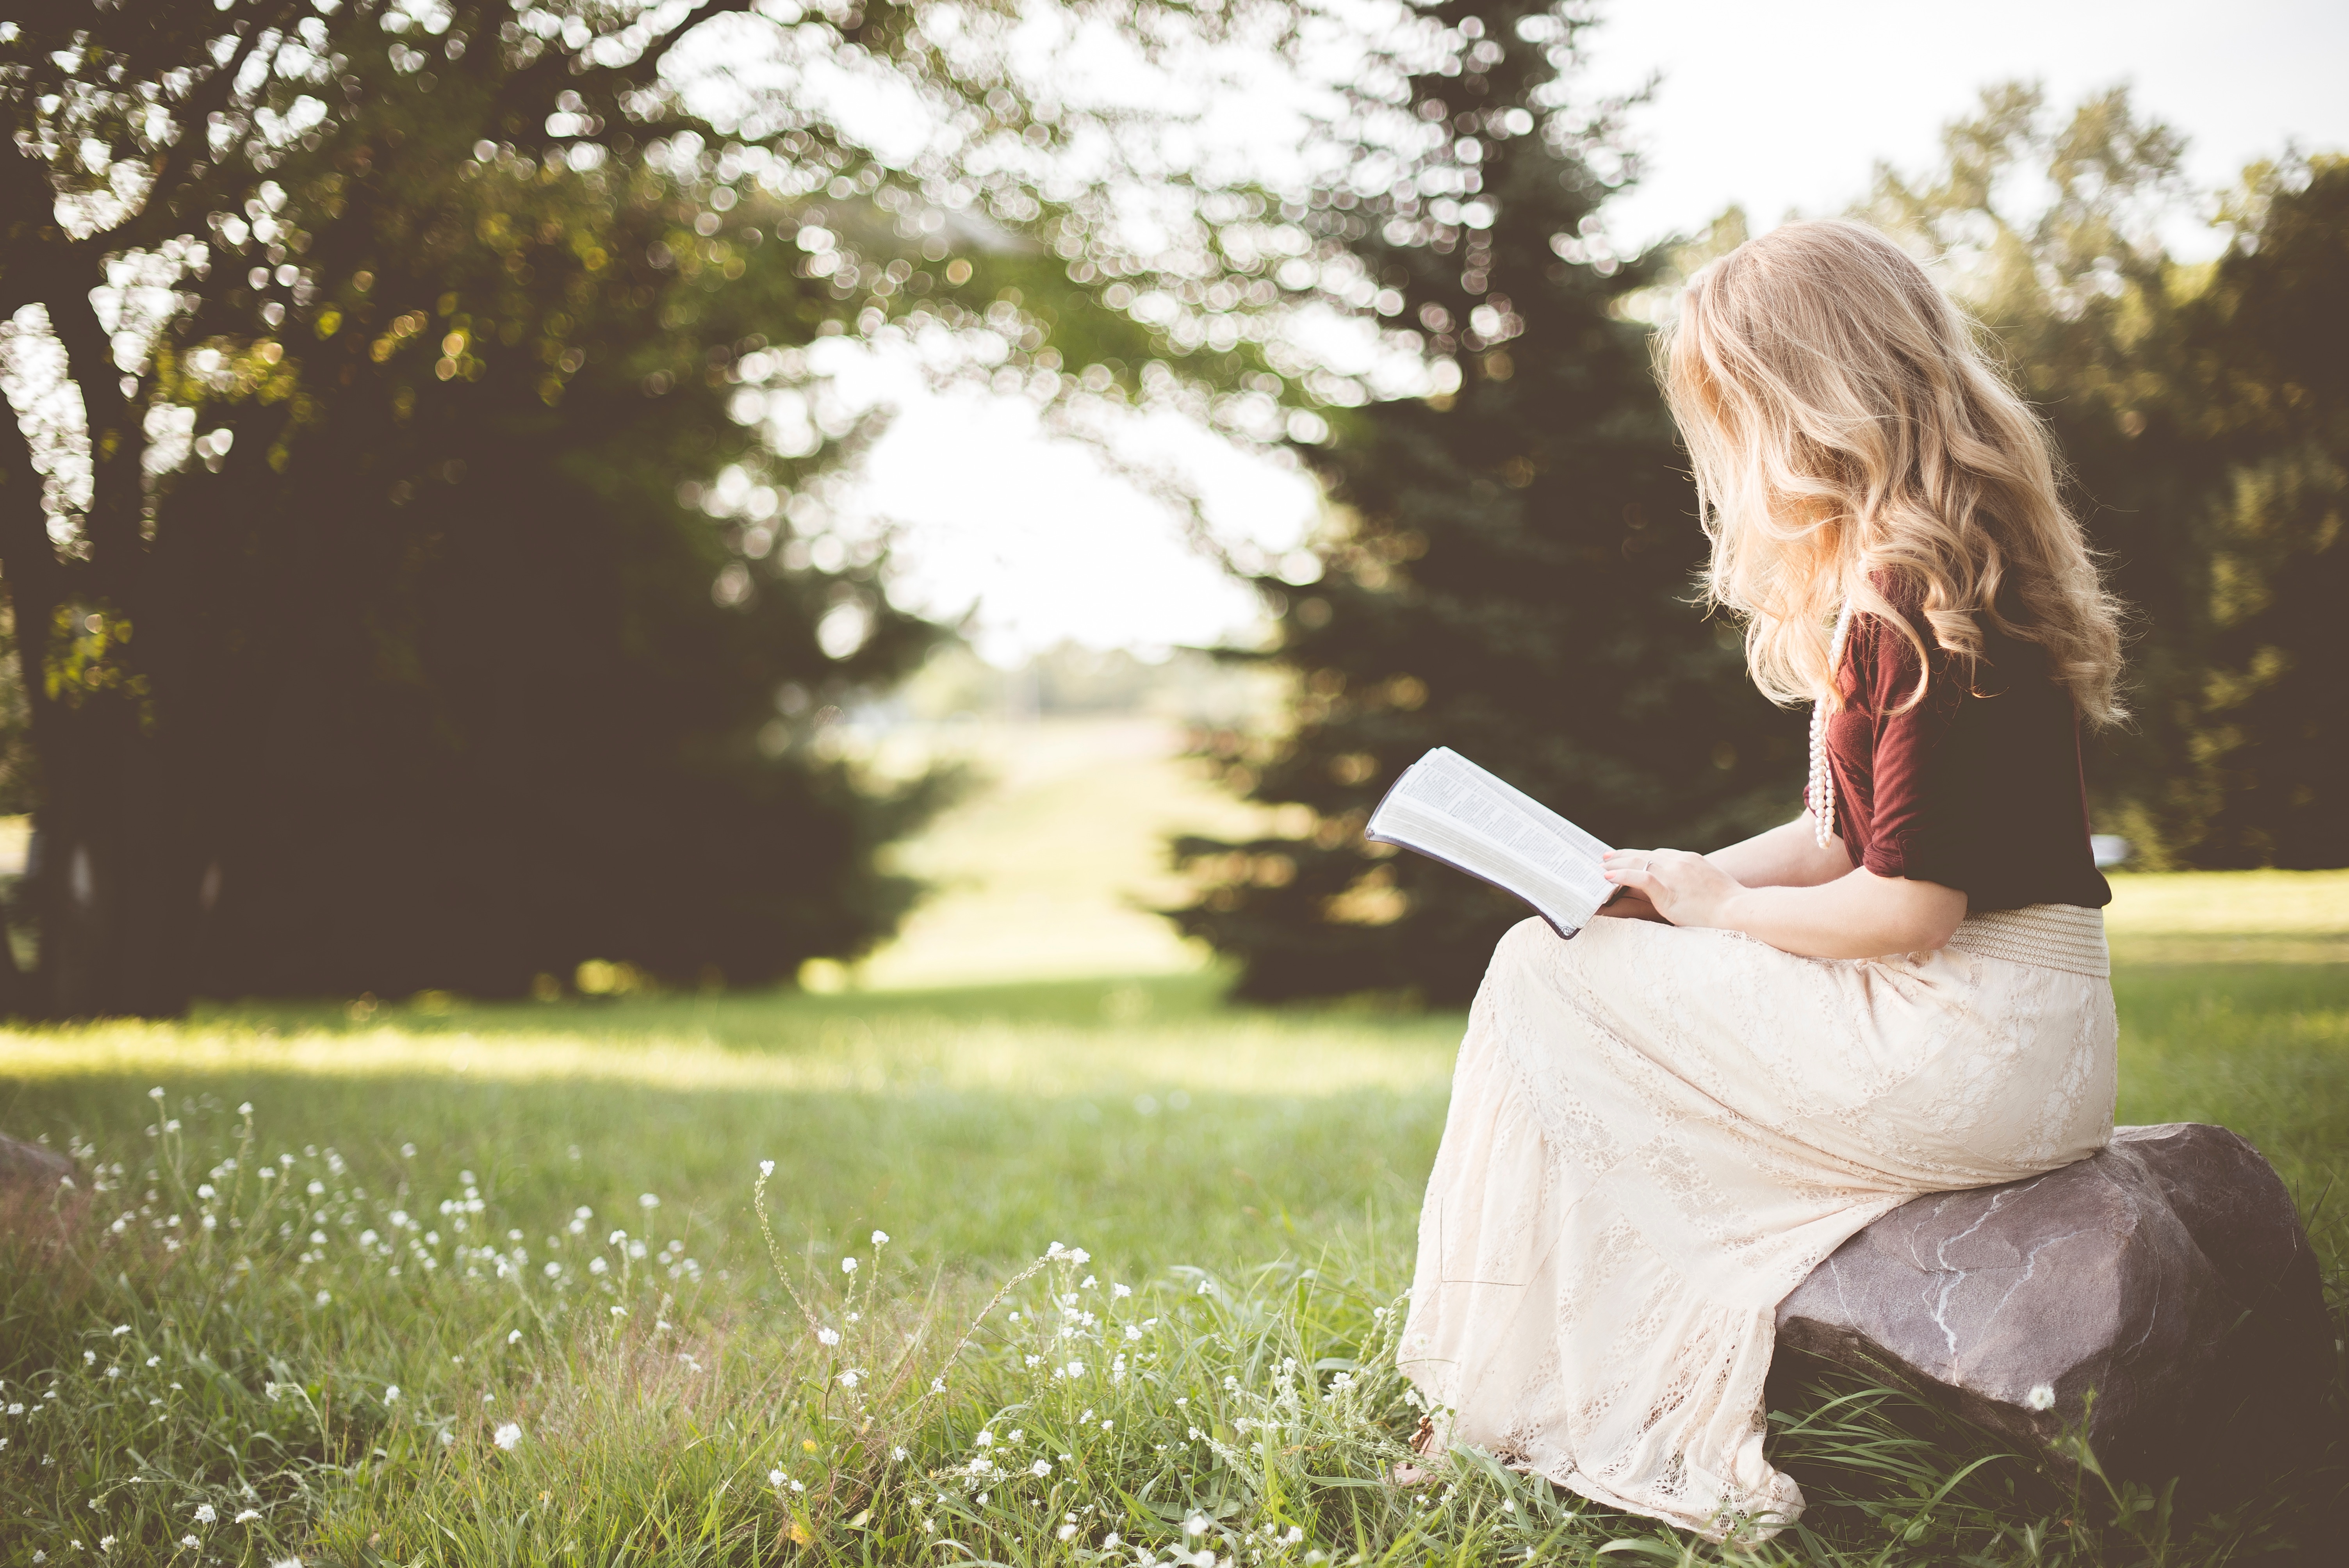 5 Books for Big Picture Homeschooling